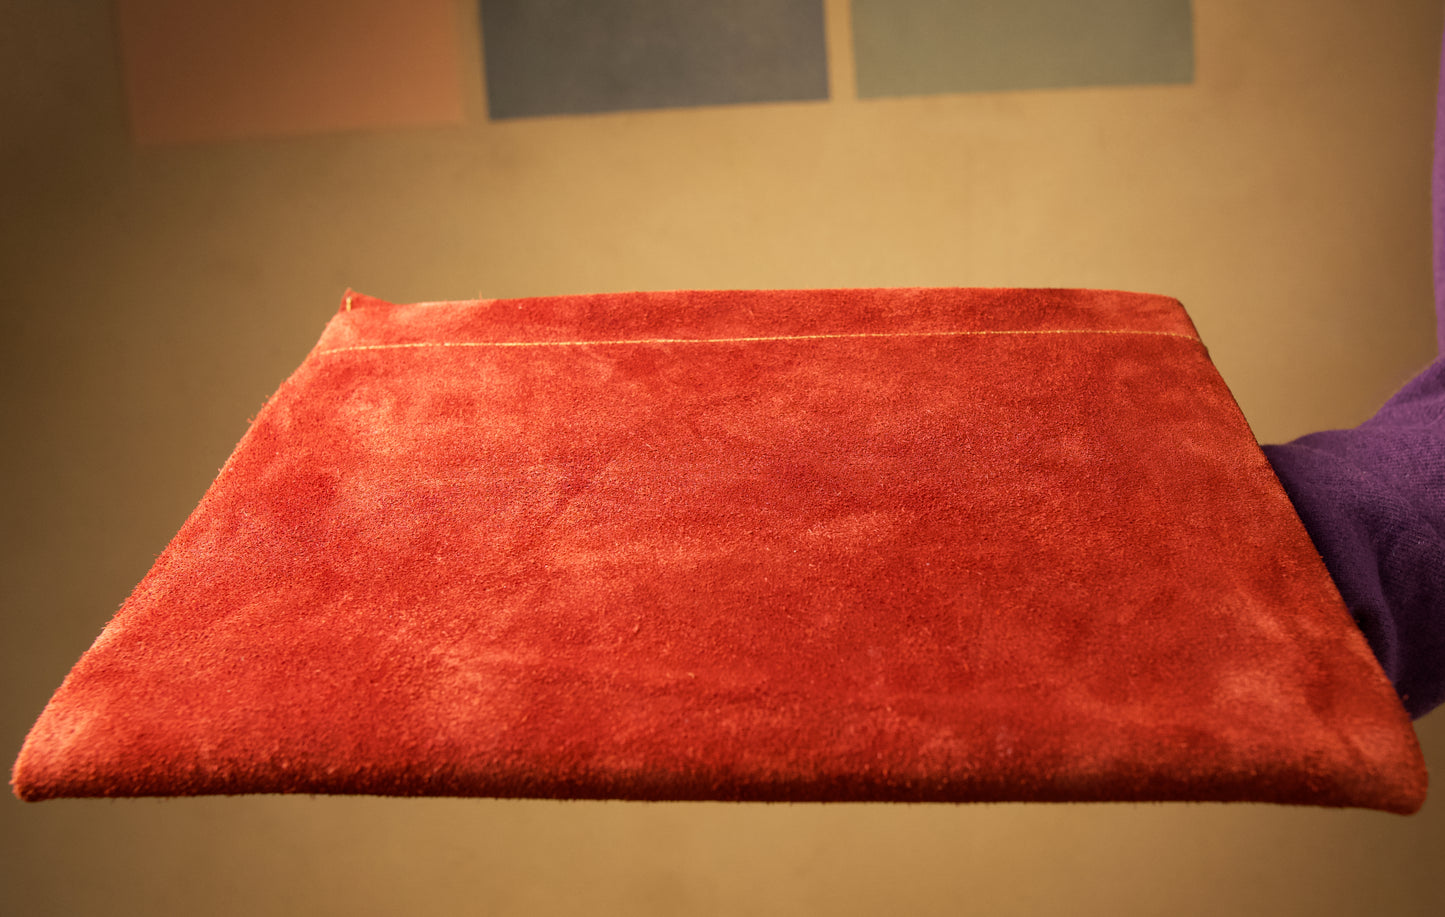 Macbook Sleeve - Red Velour Leather